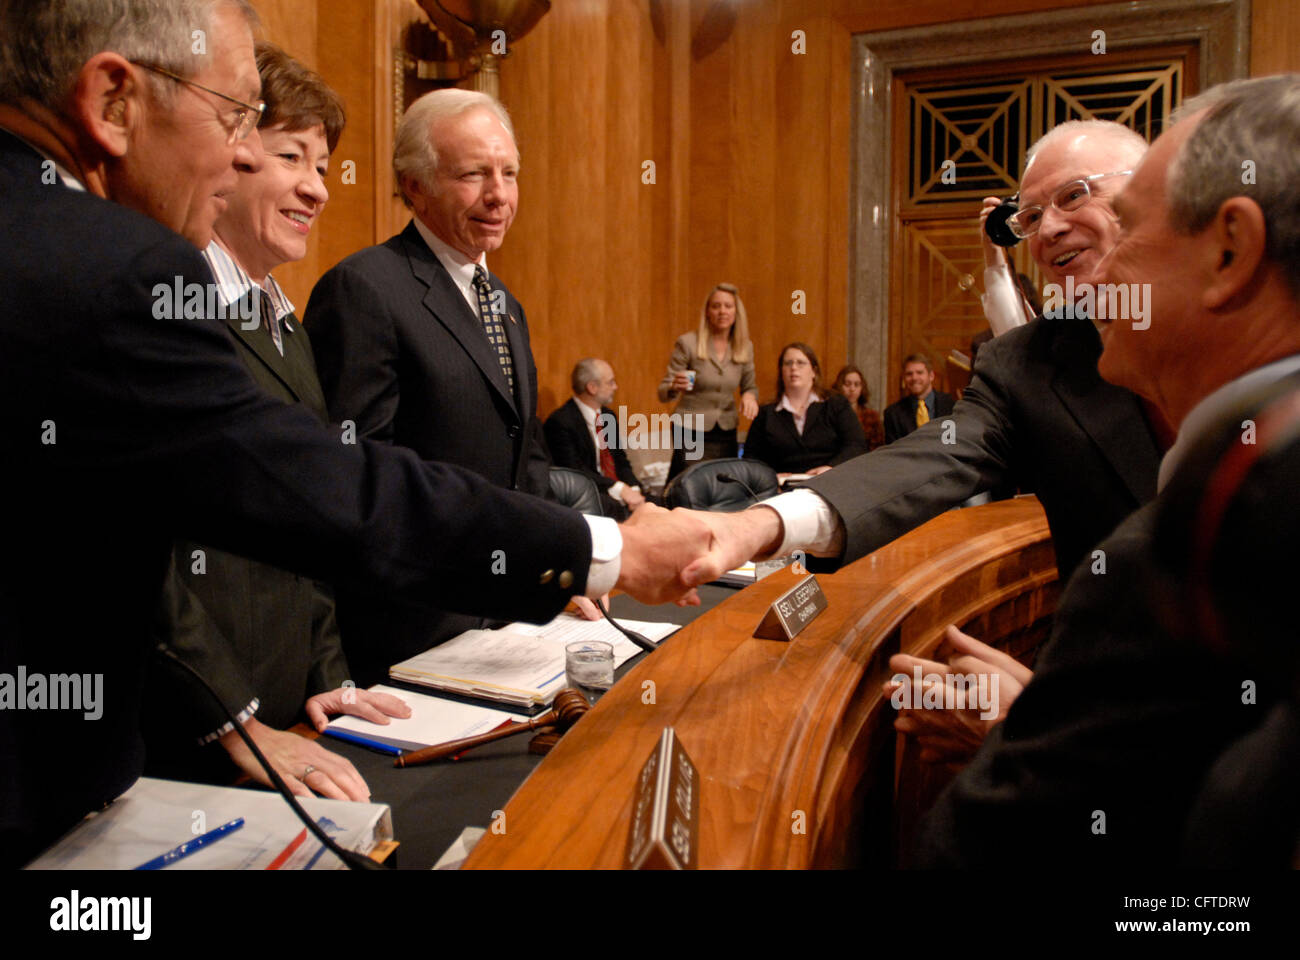 Jan 09, 2007 - Washington, DC, USA - (L-R) Senators GEORGE VOINOVICH (R-OH) SUSAN COLLINS (R-ME) and JOSEPH LIEBERMAN (I-CT) meet with 9/11 Commission co-chair Lee Hamilton and New York City Mayor Michael Bloomberg before the Senate Committee on Homeland Security and Government Affairs hearing on im Stock Photo